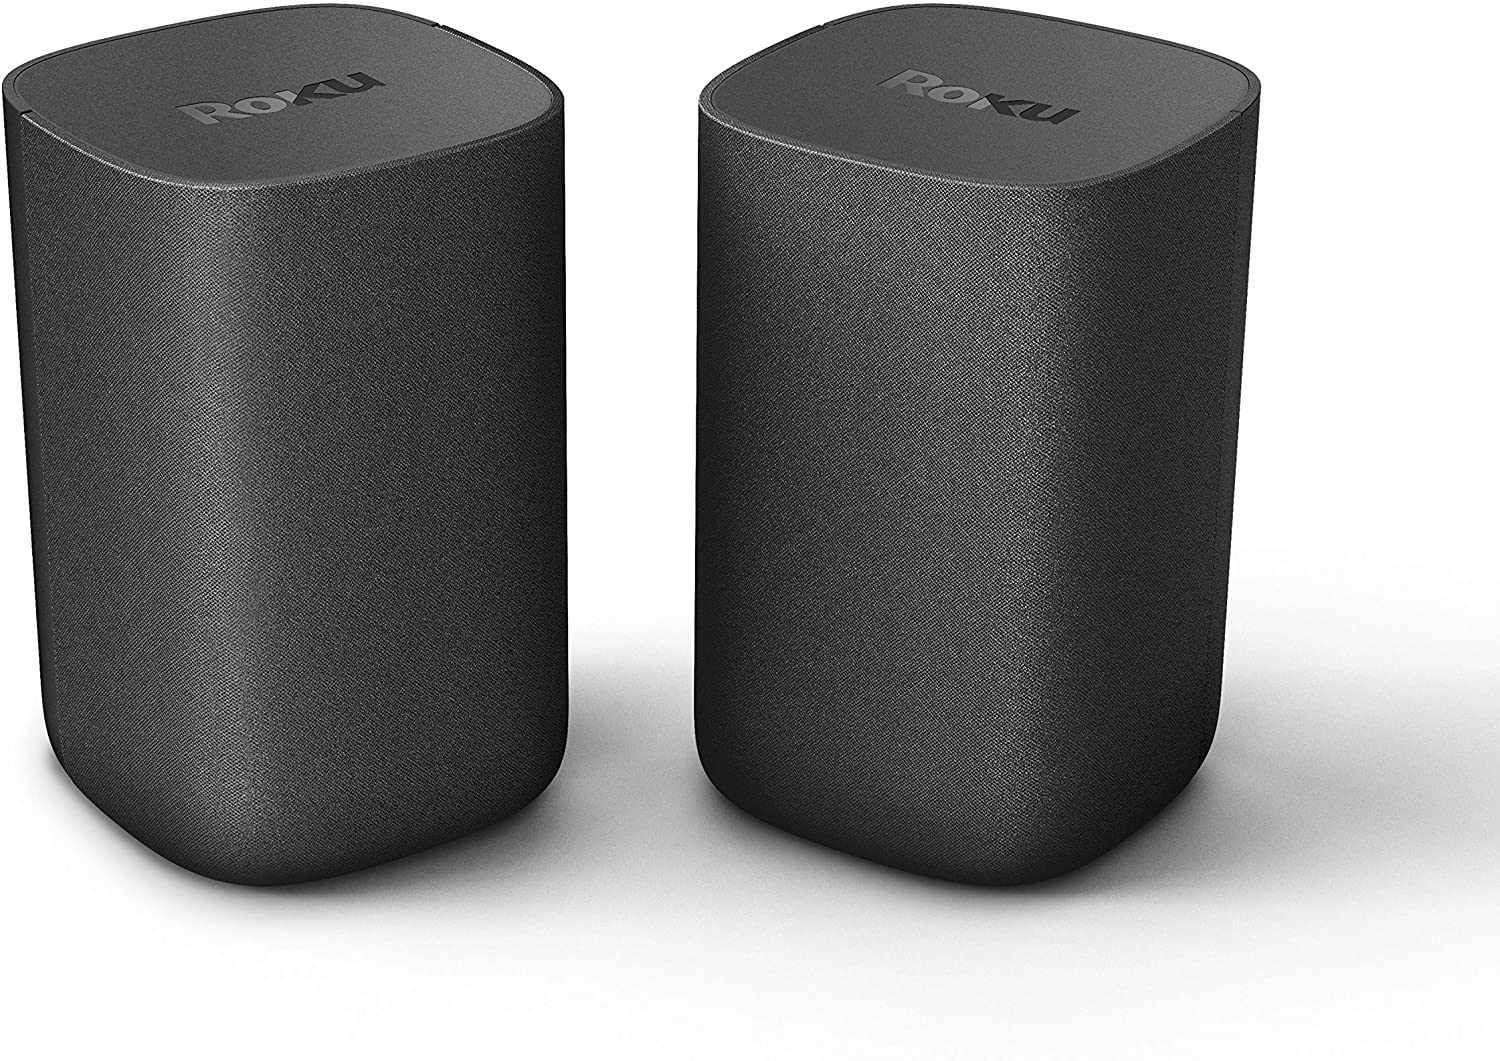 Updated Roku Wireless Speakers Make an Early Appearance on Amazon